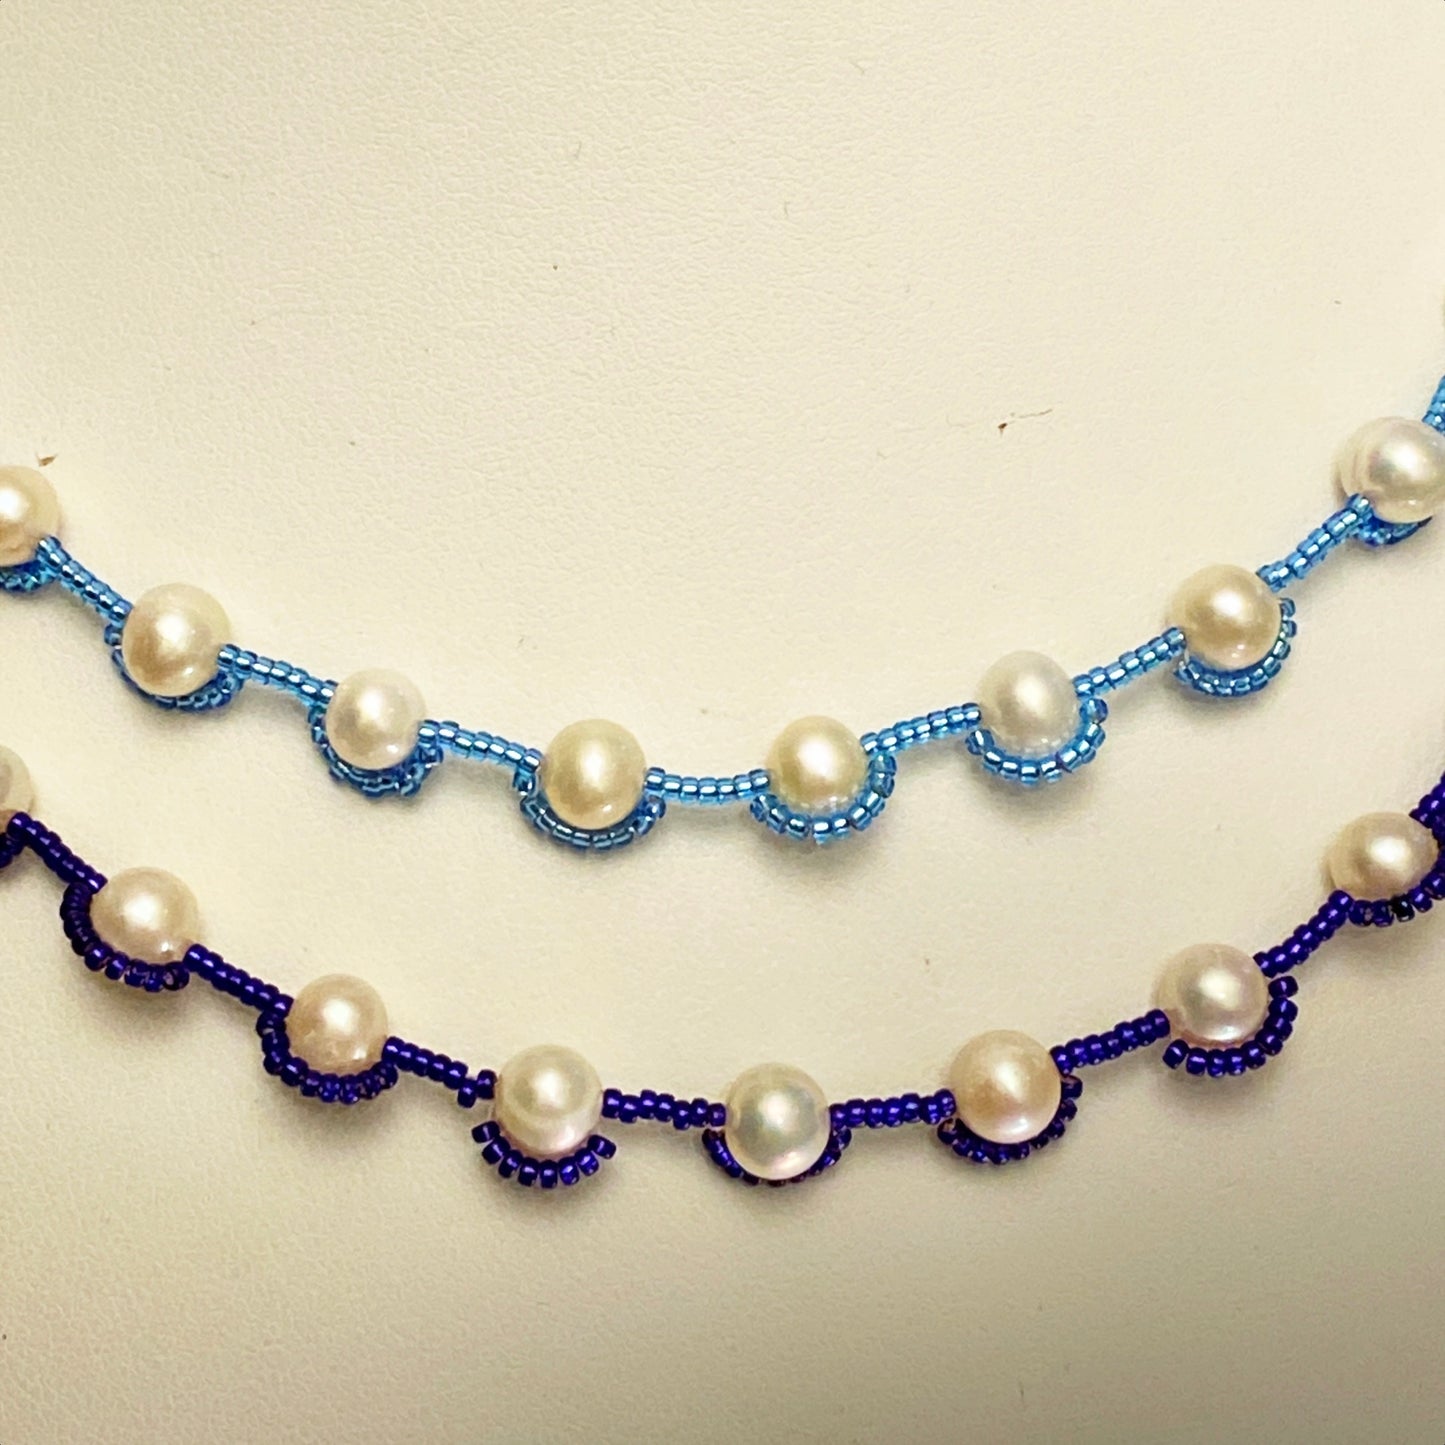 Delicate pearl necklaces with choice of seed beads